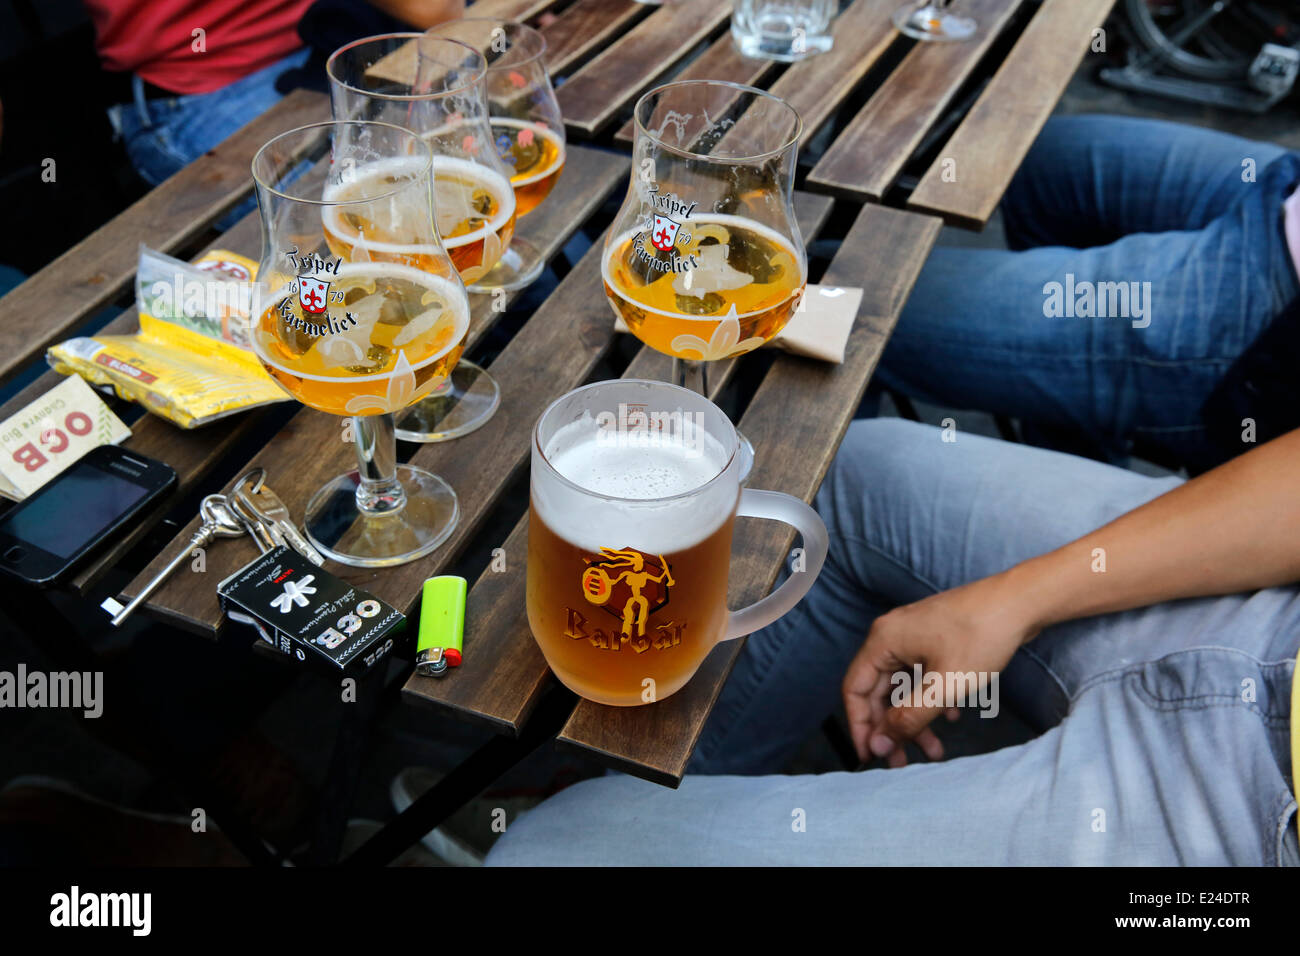 Young people drinking beers in a bar Stock Photo